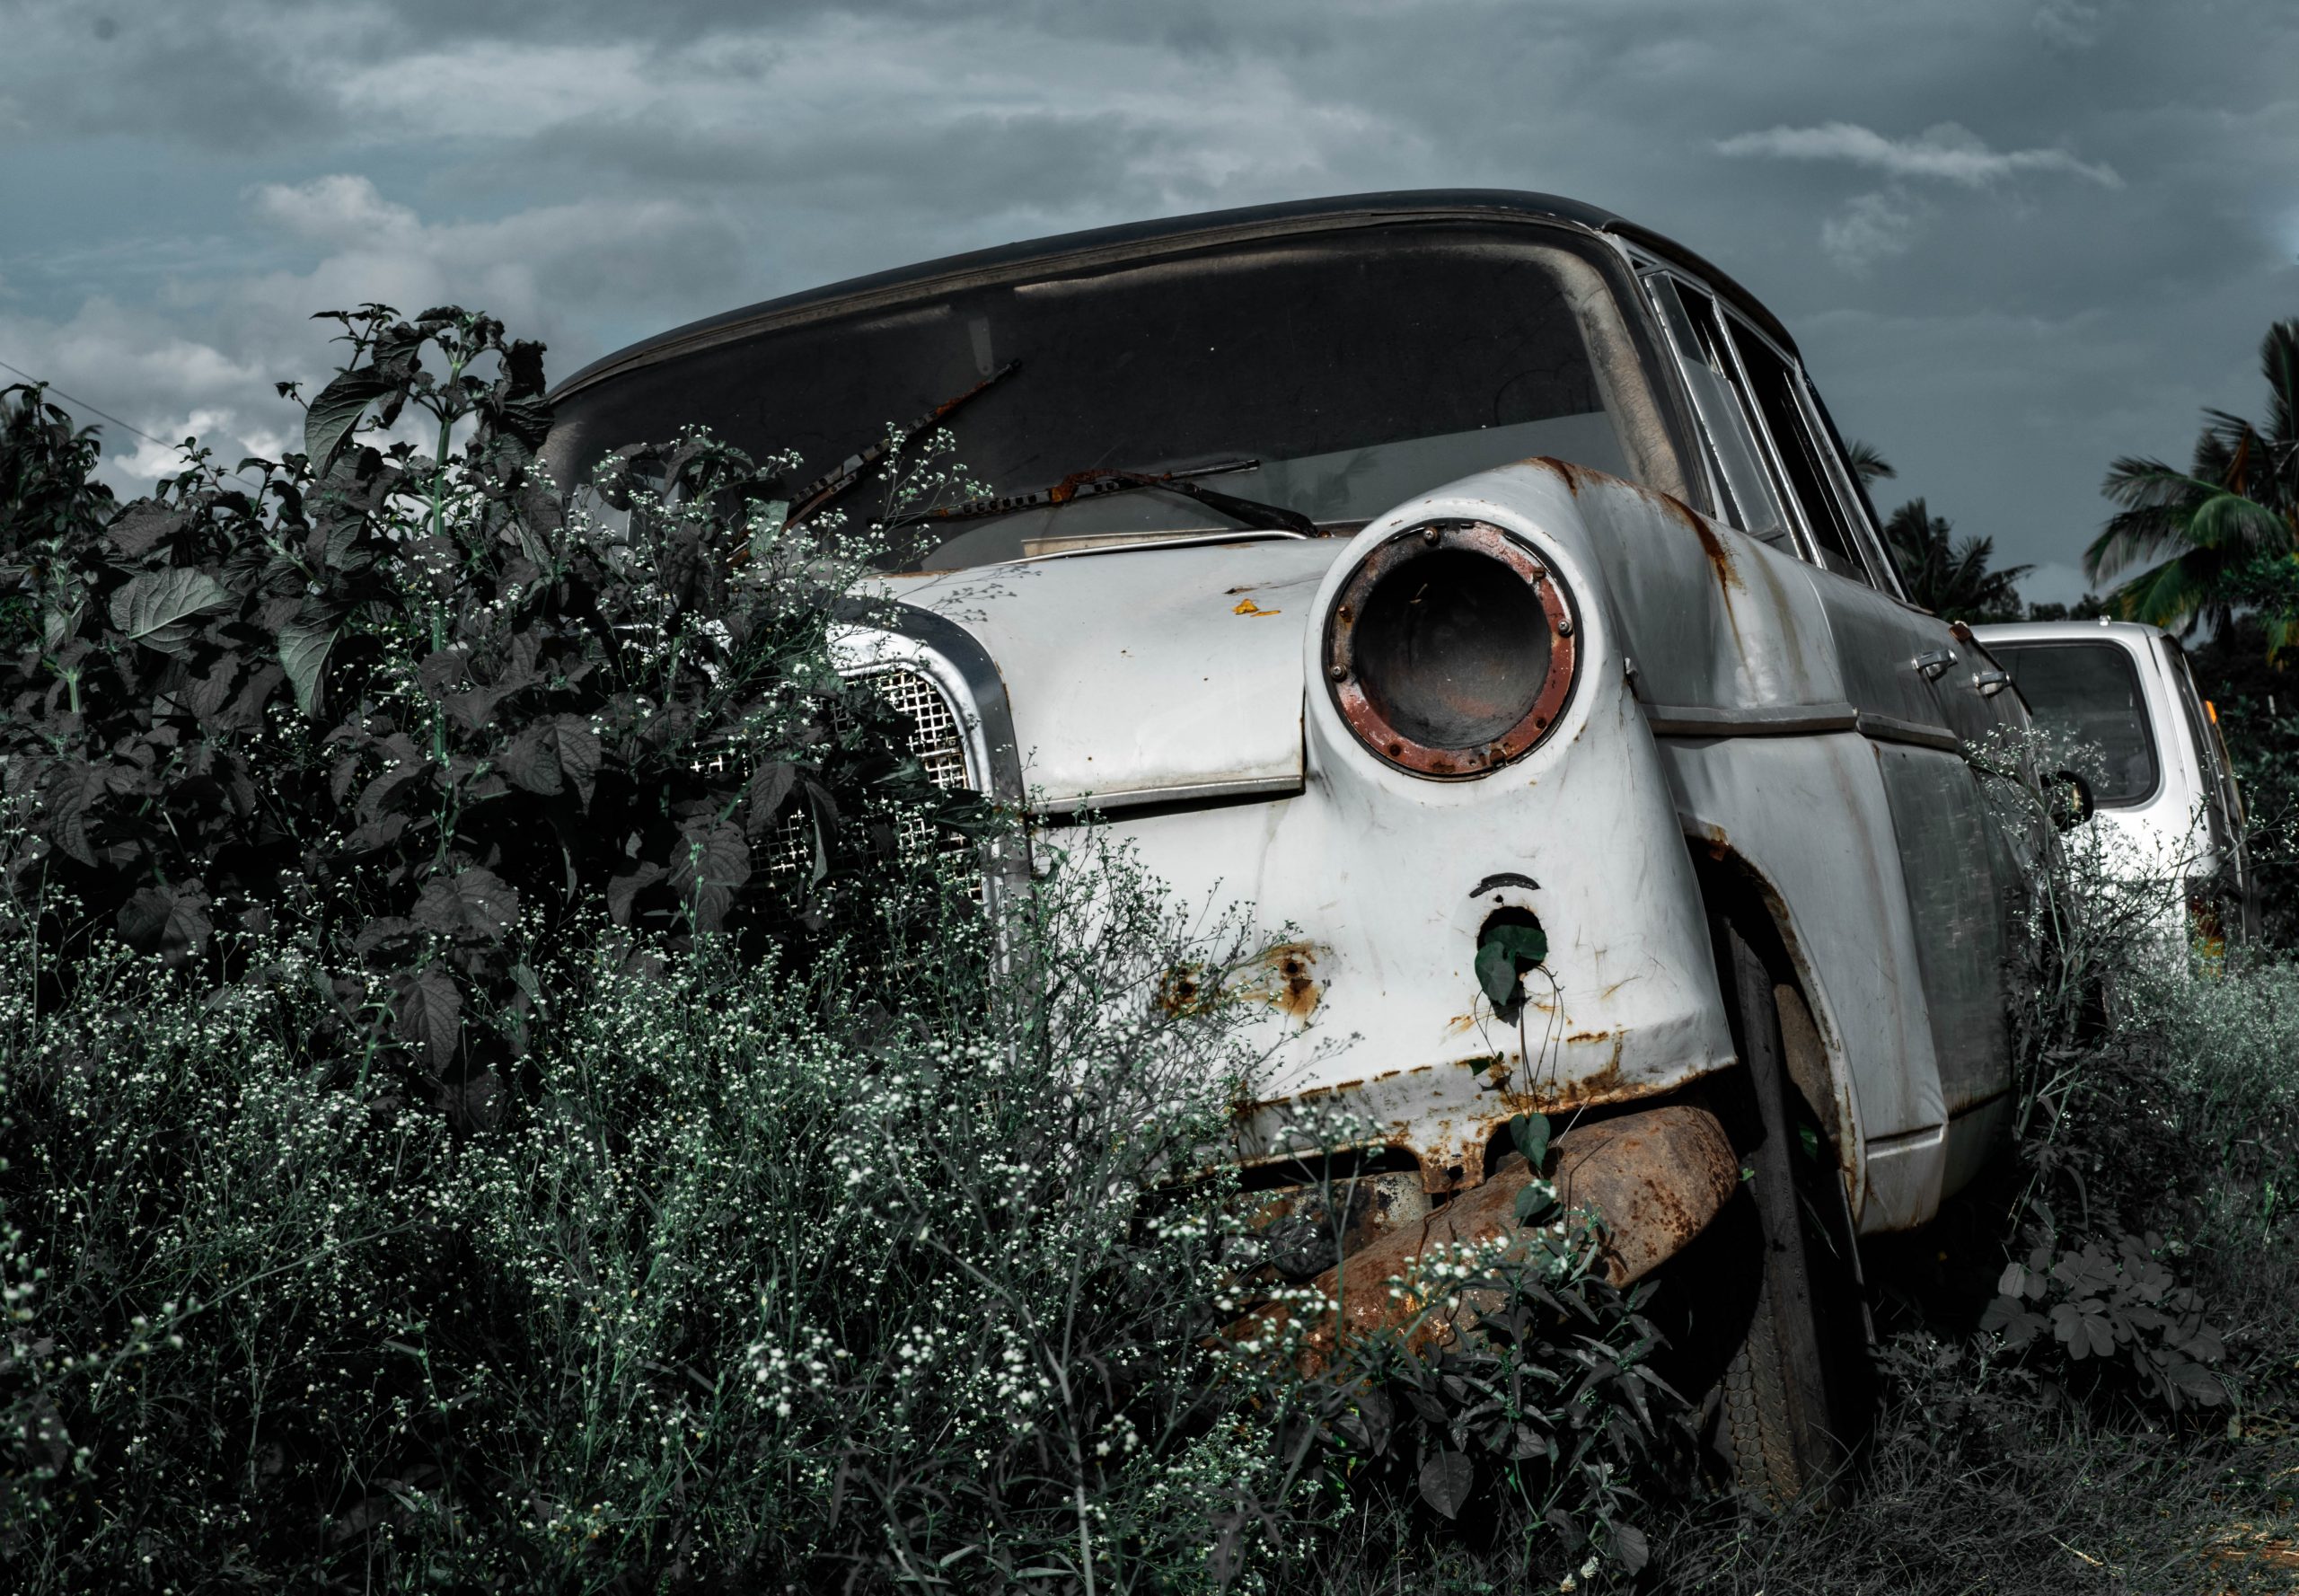 A rusted vintage car.